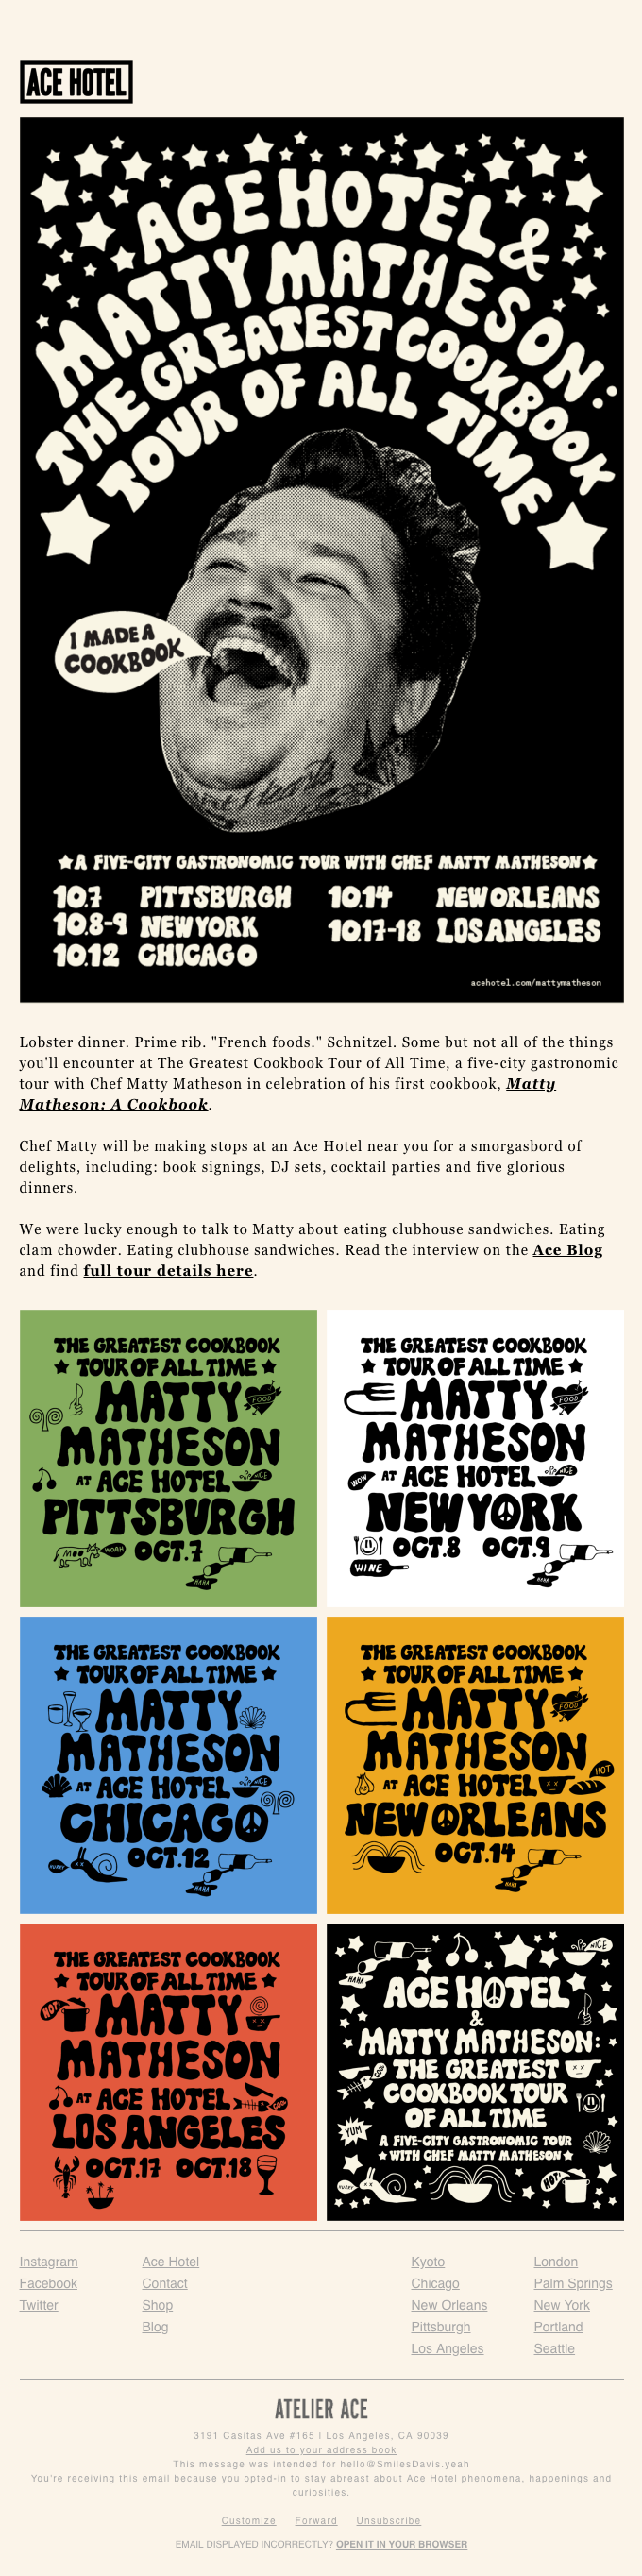 Ace Hotel x Matty Matheson: The Greatest Cookbook Tour of All Time